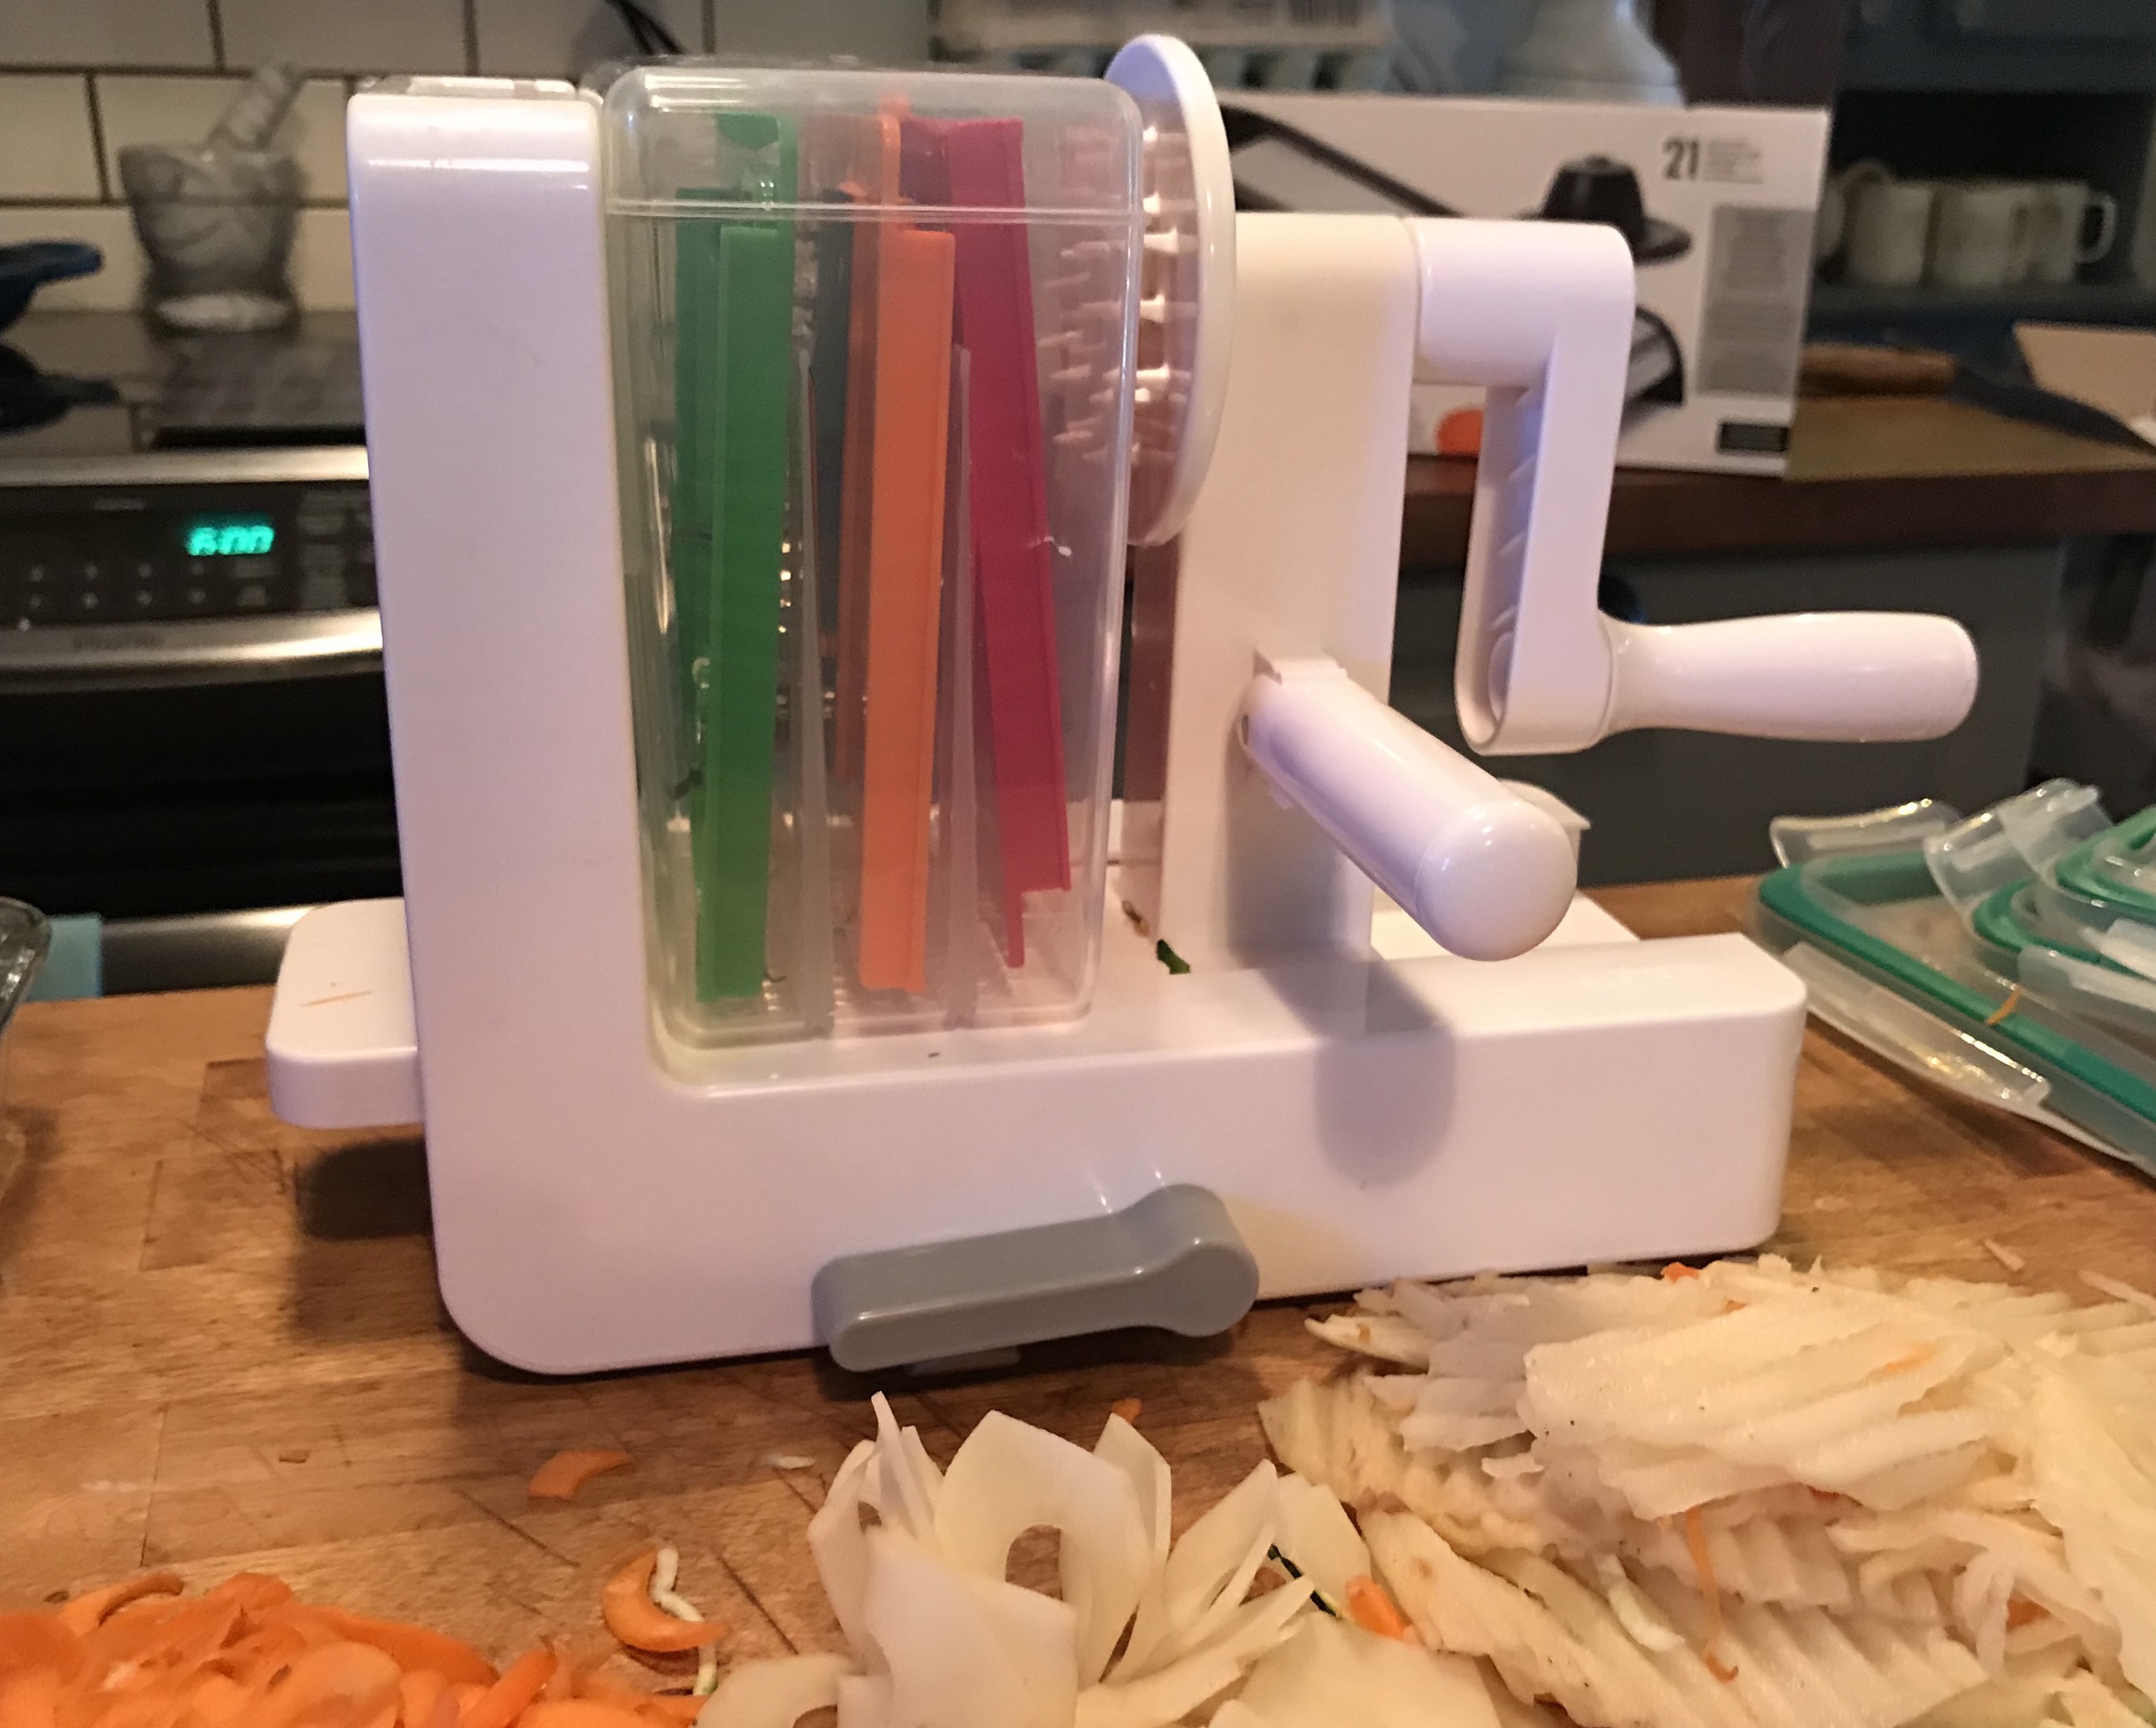 Spiralizer Review